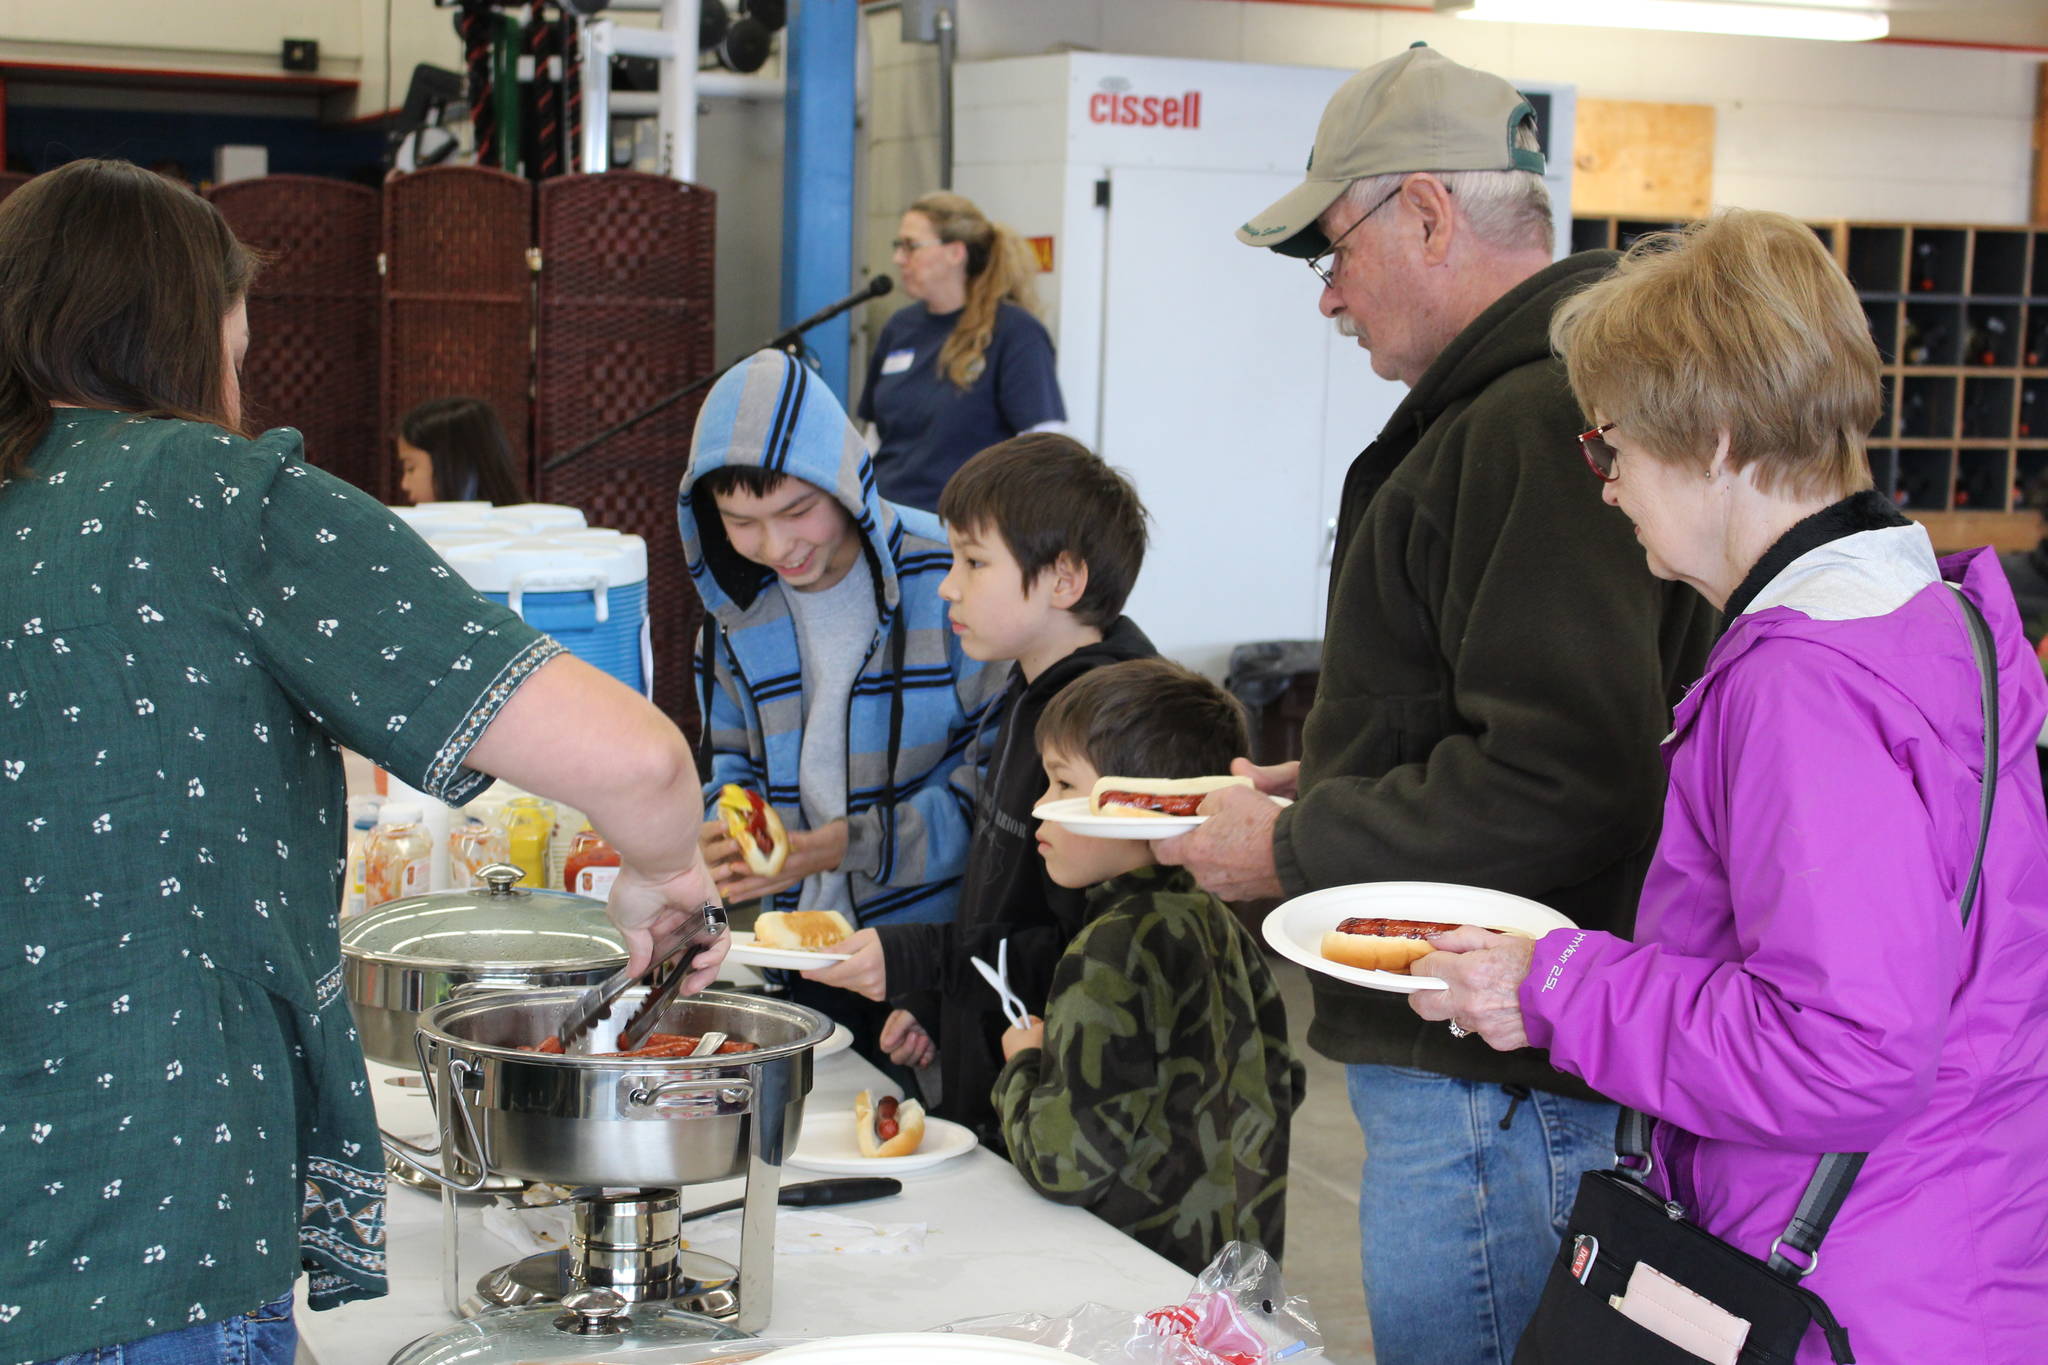 Visitors the fire station grab some free food during the Central Emergency Services Open House at Fire Station 1 in Soldotna, Alaska on Sept. 28, 2019. (Photo by Brian Mazurek/Peninsula Clarion)